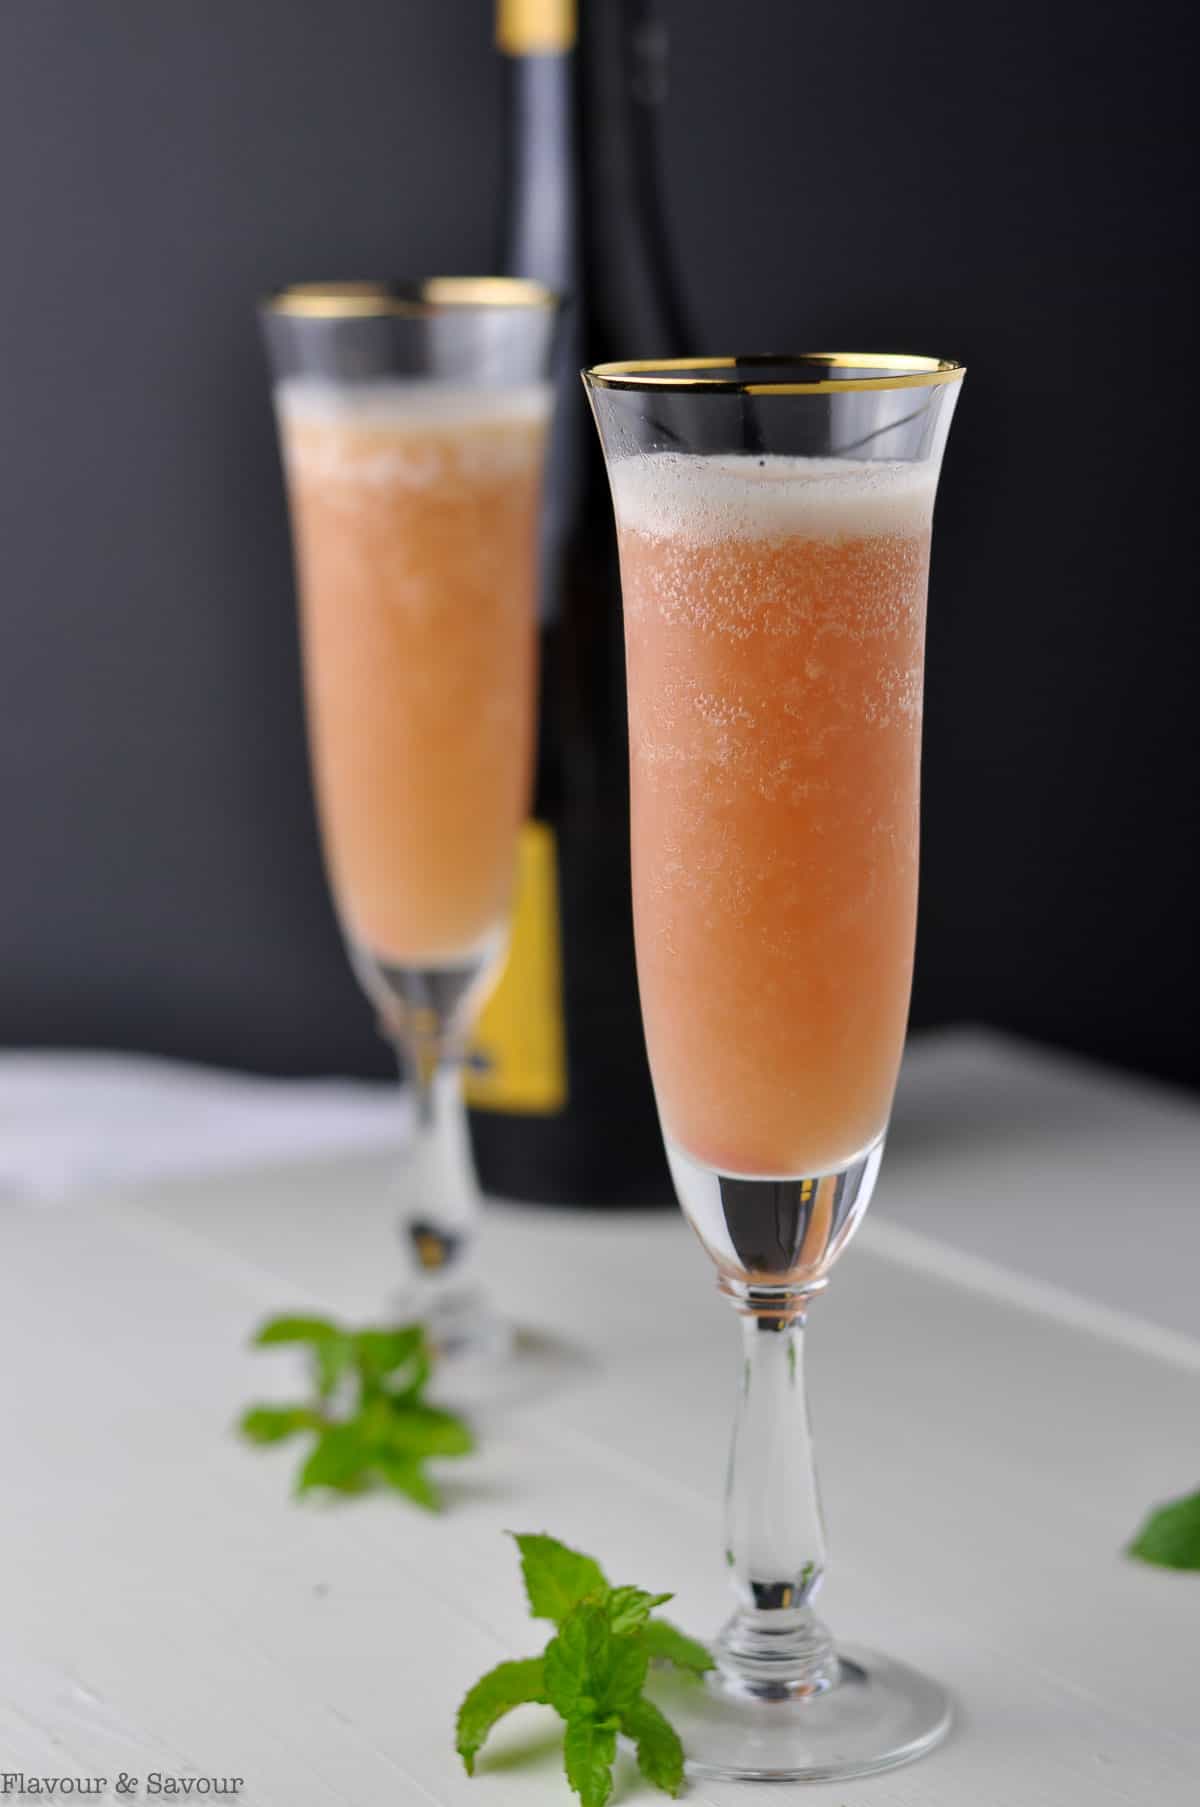 Pouring Prosecco into fluted glasses to make Rhubarb Bellini Prosecco Cocktails.